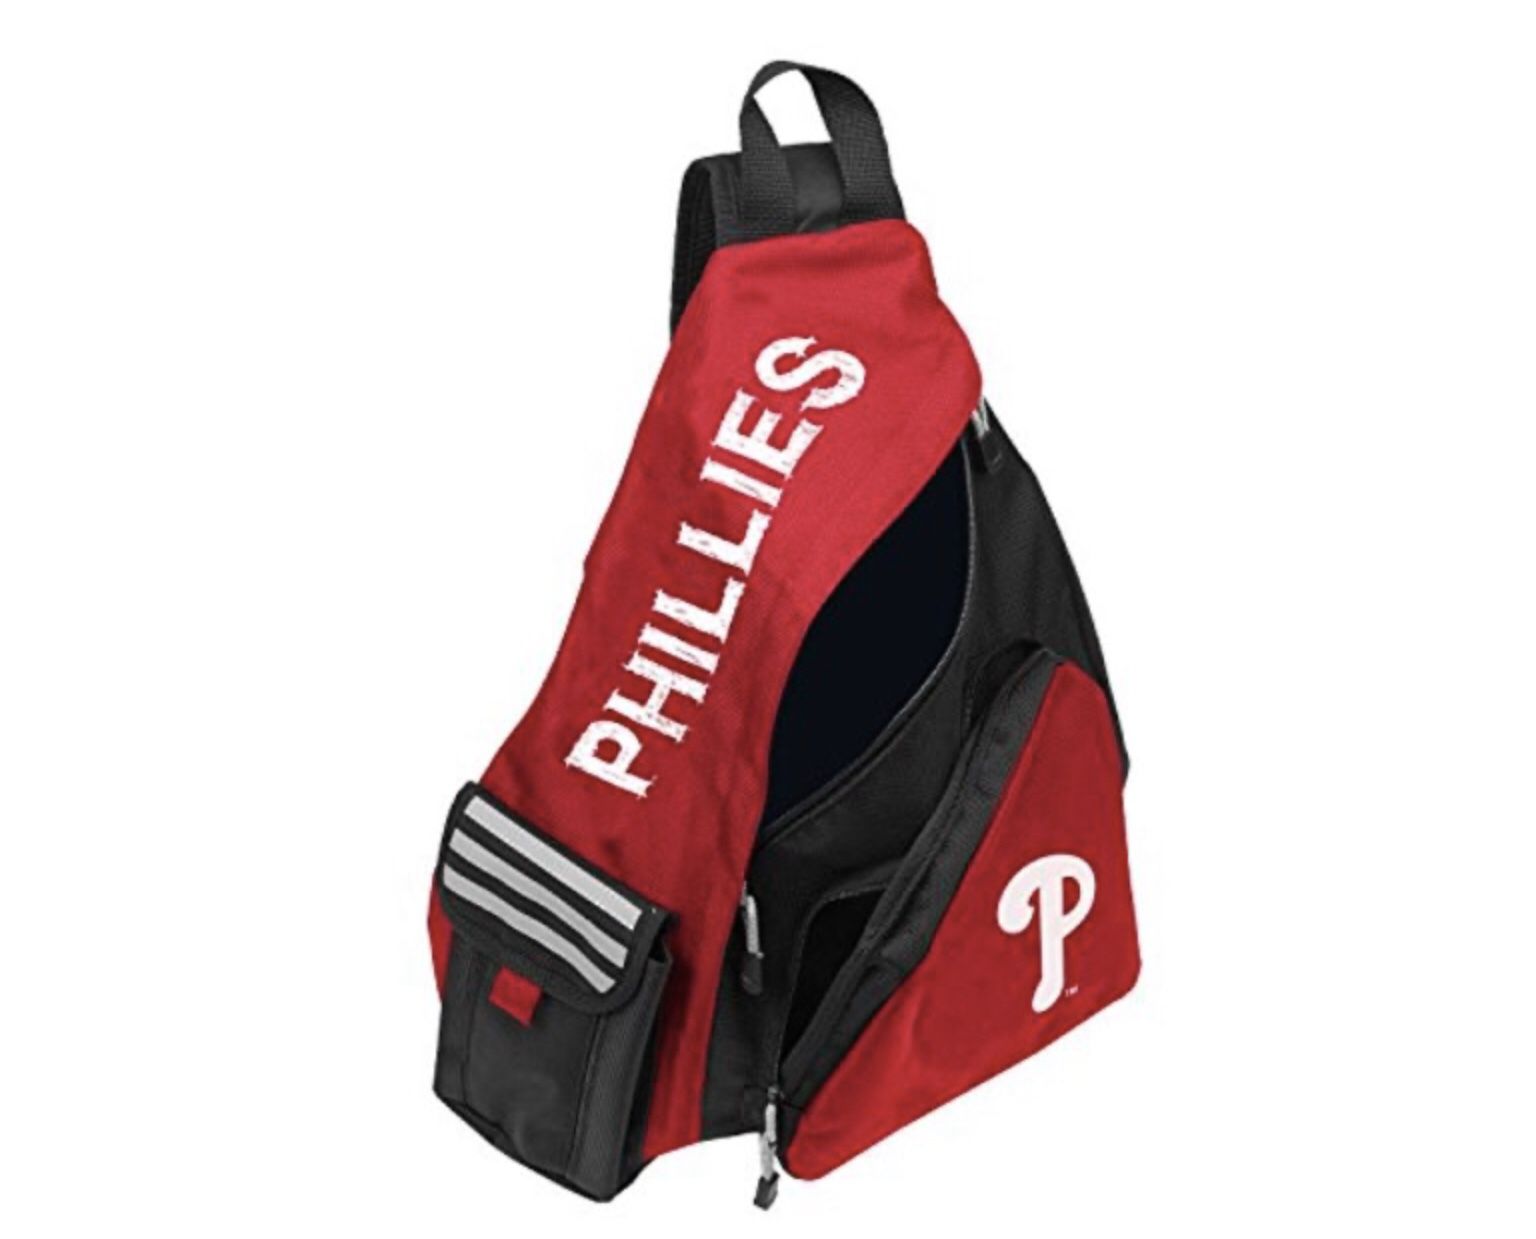 Officially Licensed MLB Leadoff Sling Travel Backpack, Team Gear, 20" x 9" x 15" *NEW*